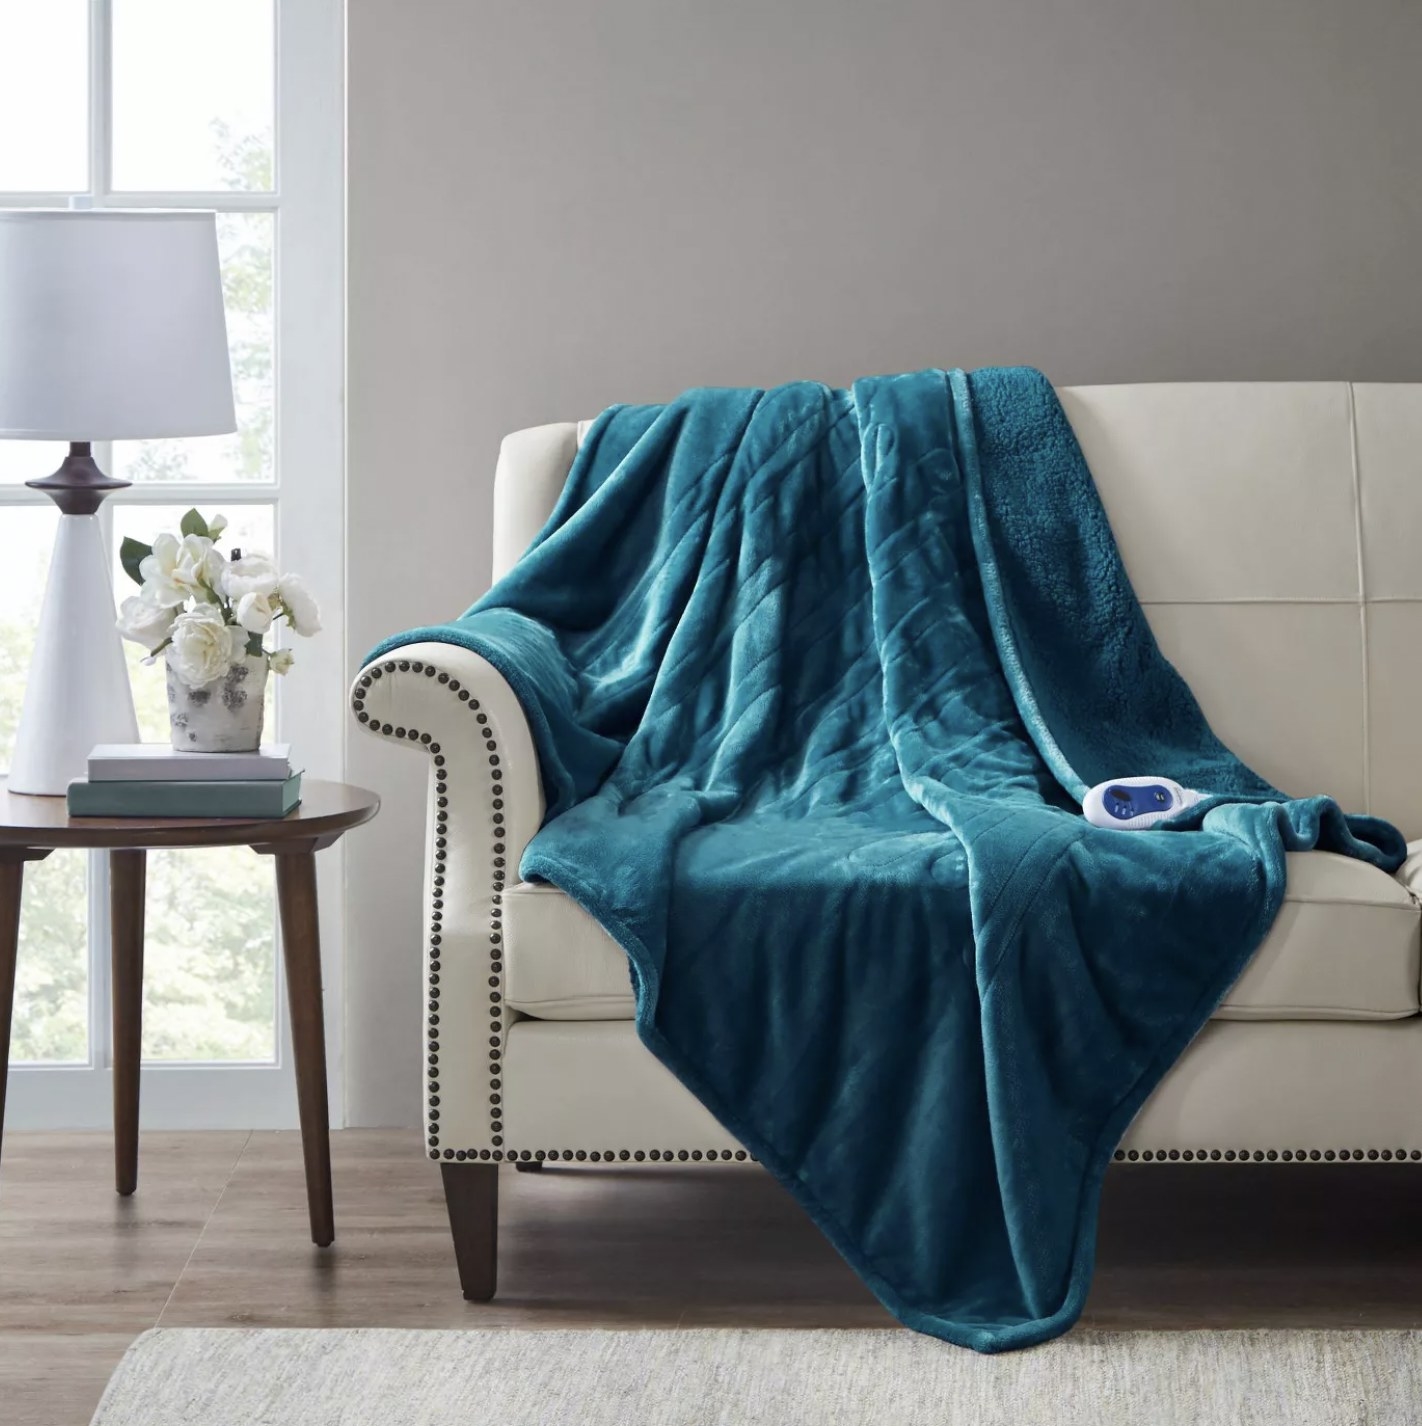 The blue plush throw hanging over the back of a sofa